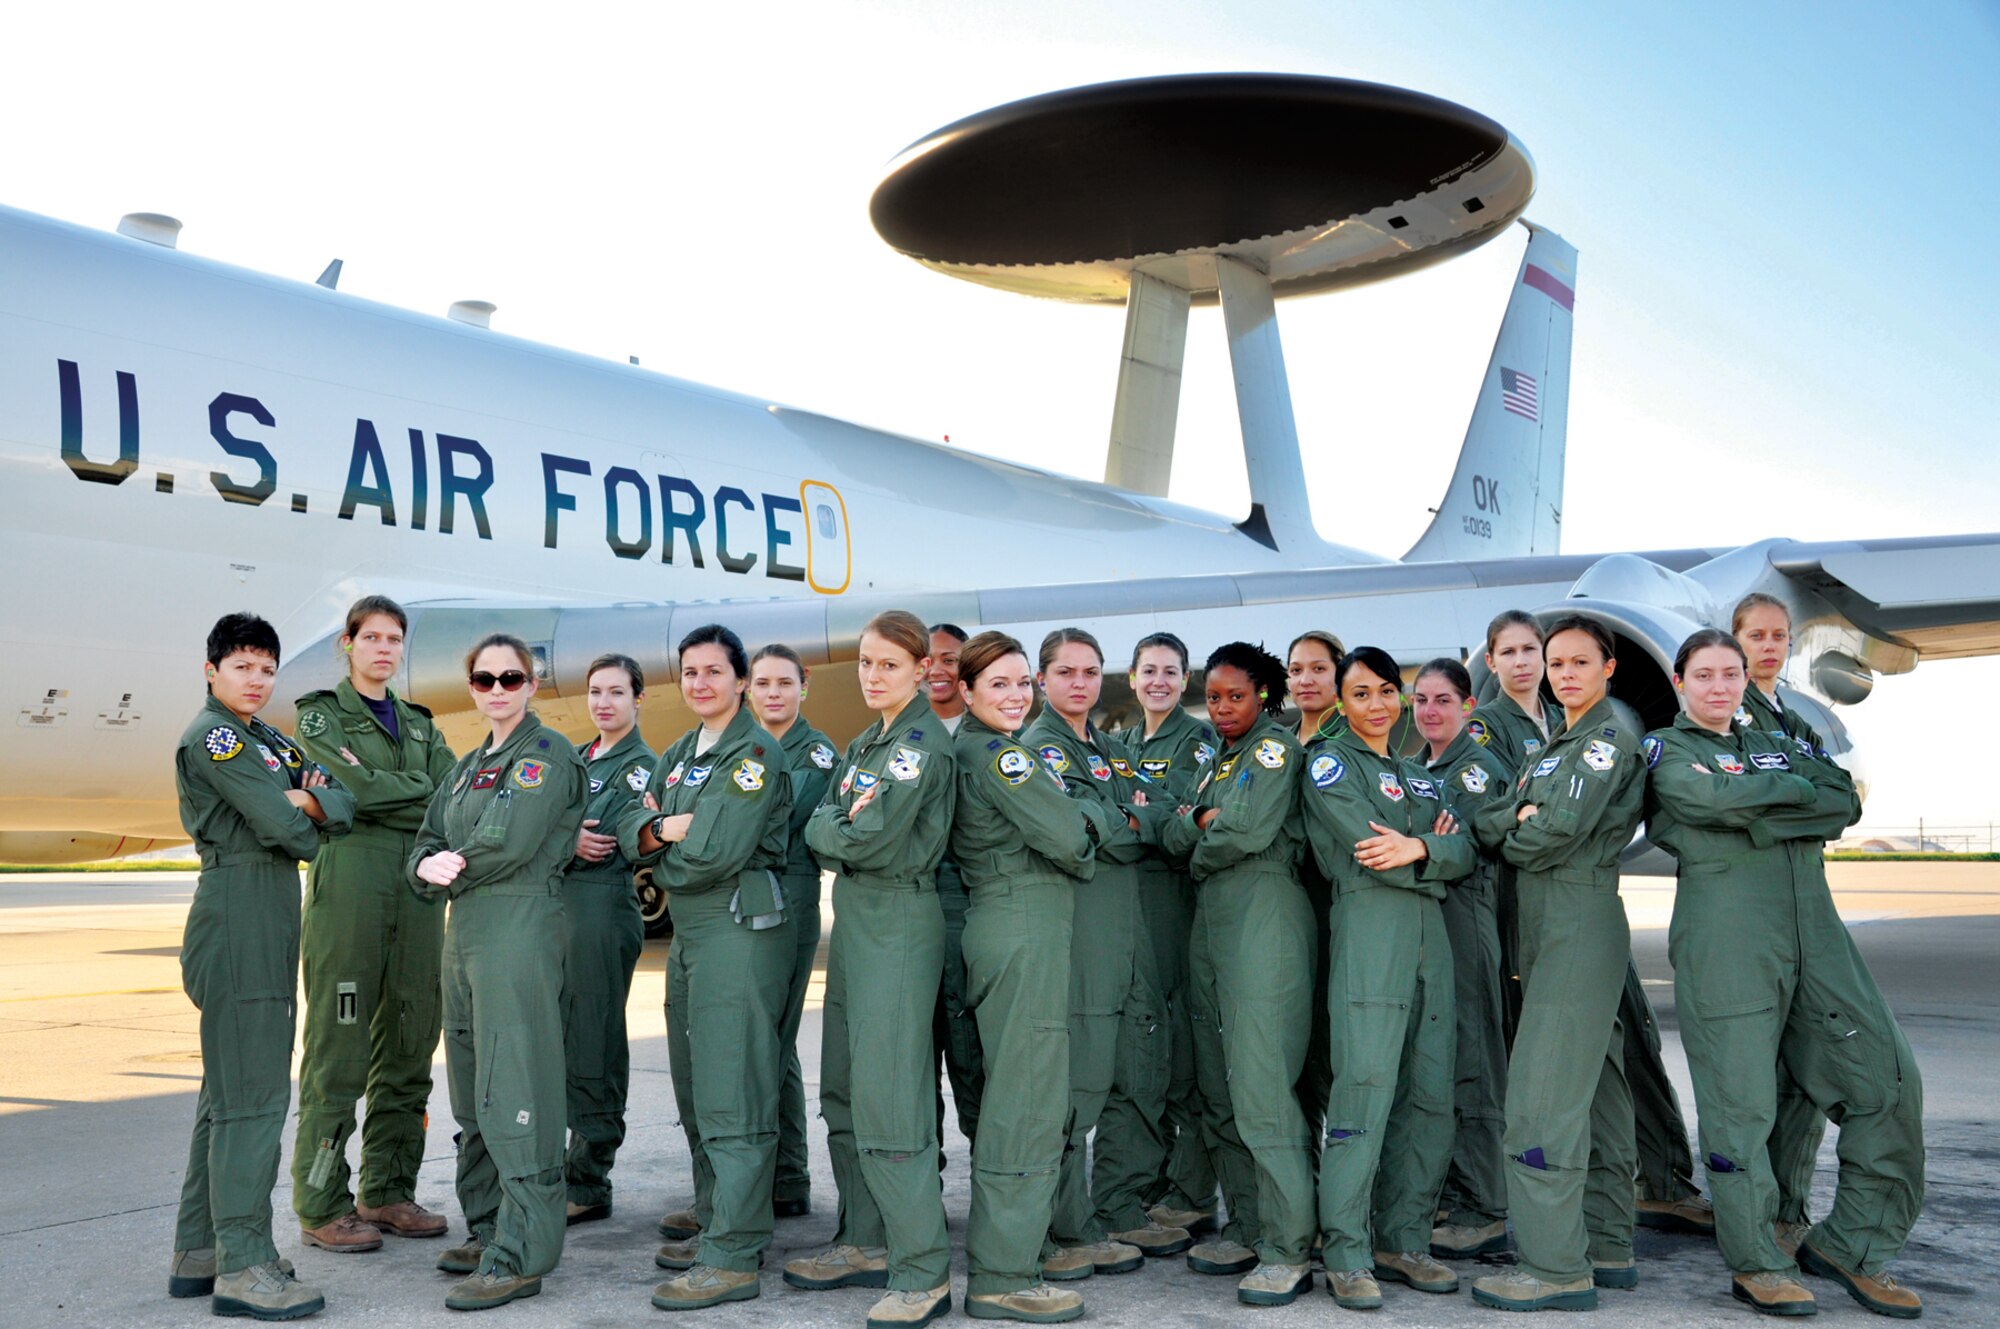 Airmen with the 552nd Air Control Wing and 513th Air Control Group pose for a photograph prior to making an historic all-female flight on Aug. 23. (Air Force photo by Darren D. Heusel)